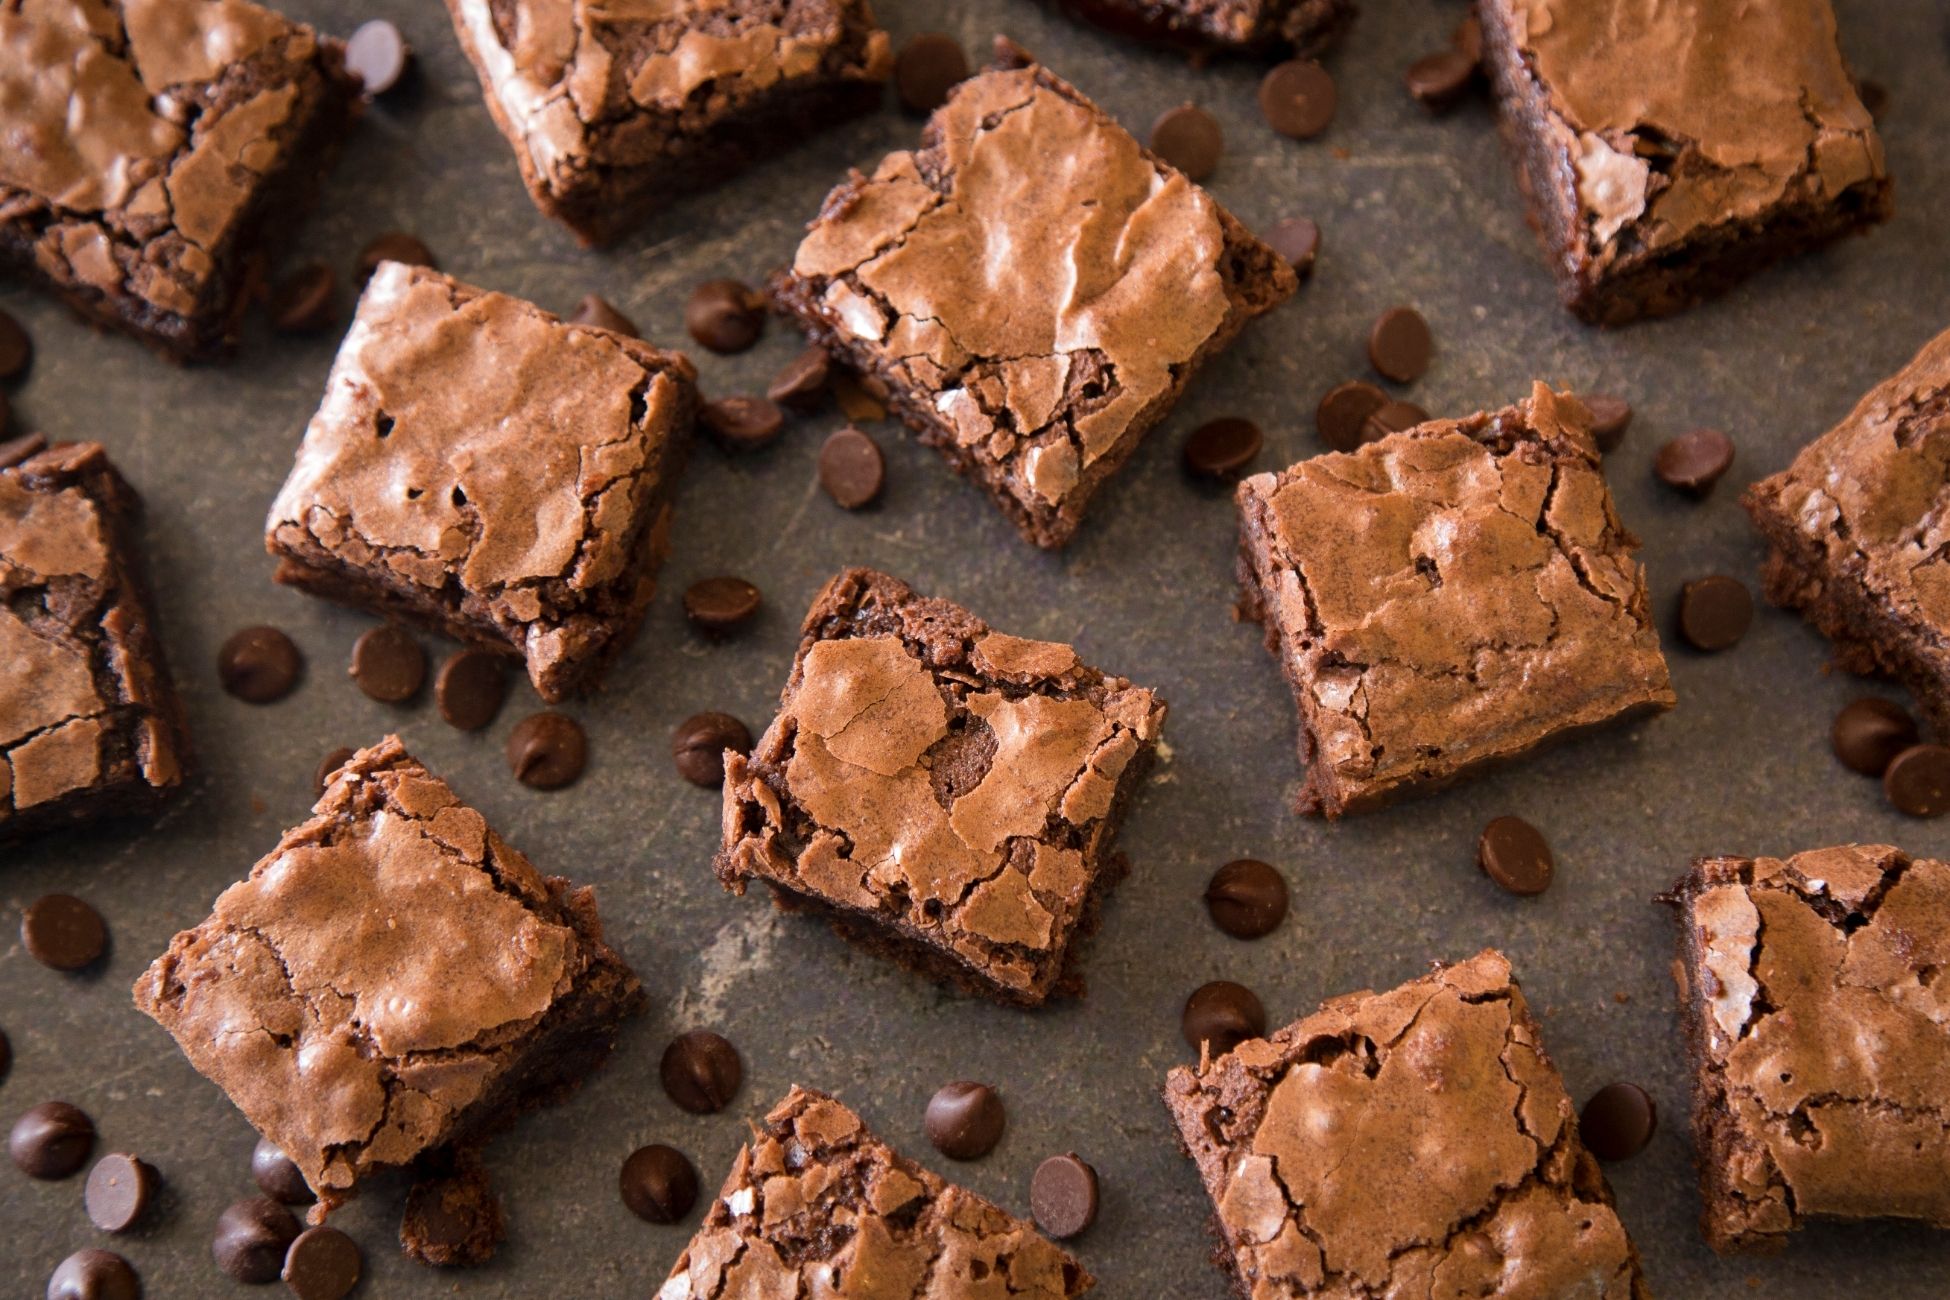 Tips for Better Brownies